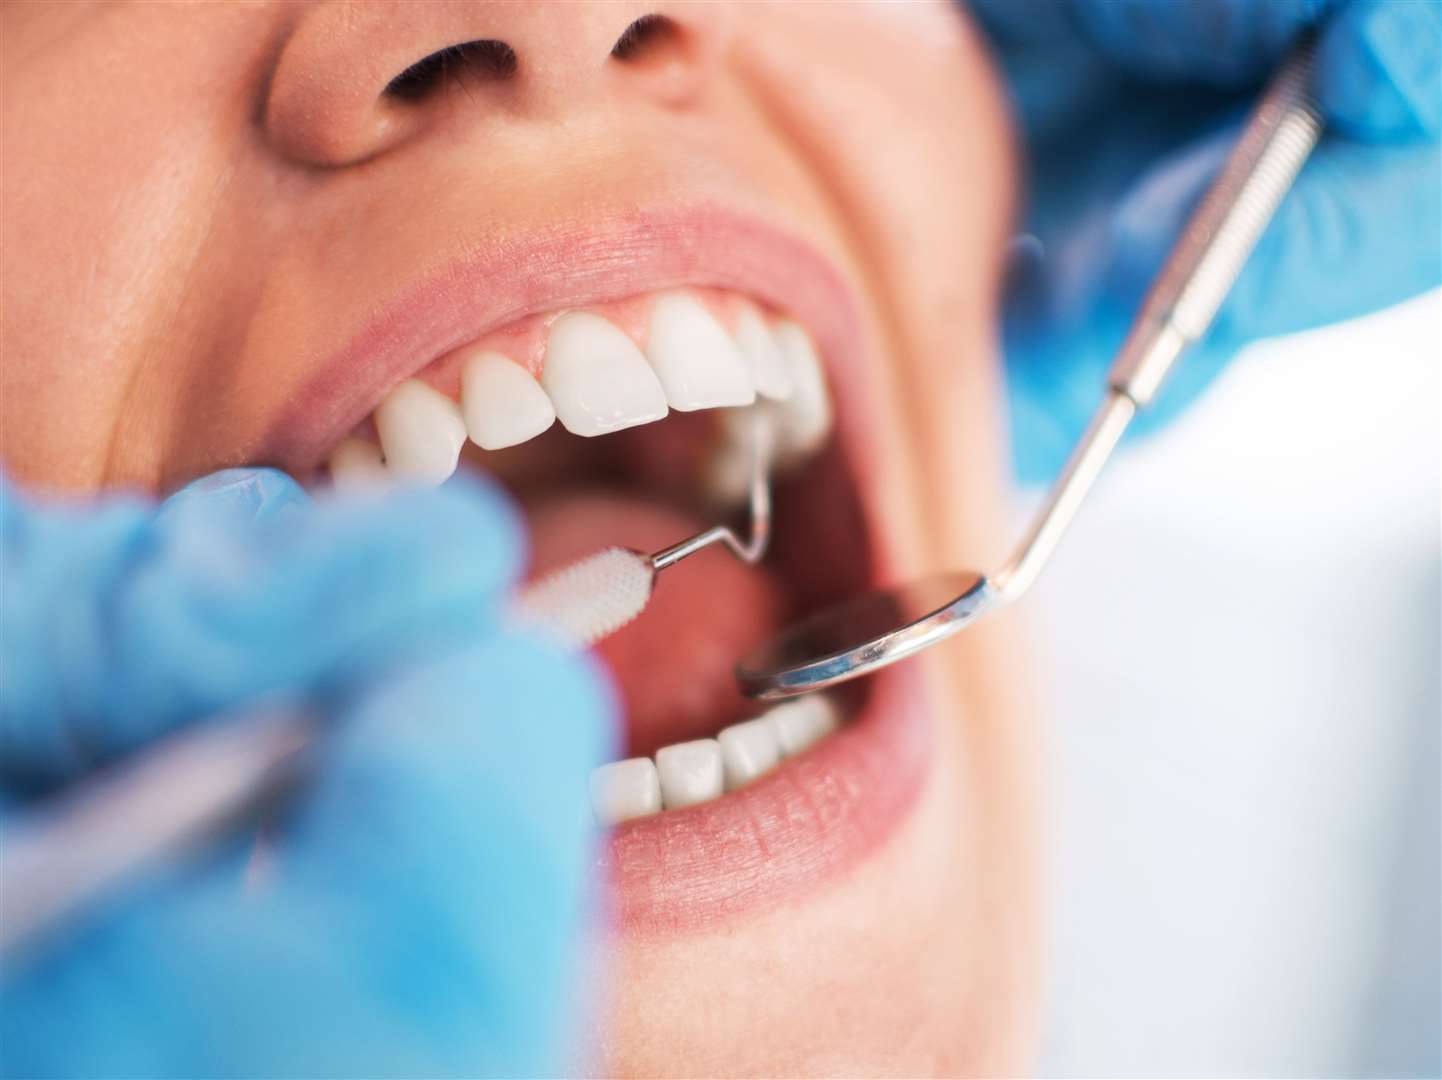 A shortage of NHS dentists has left people unable to access affordable dental care. Picture: iStock